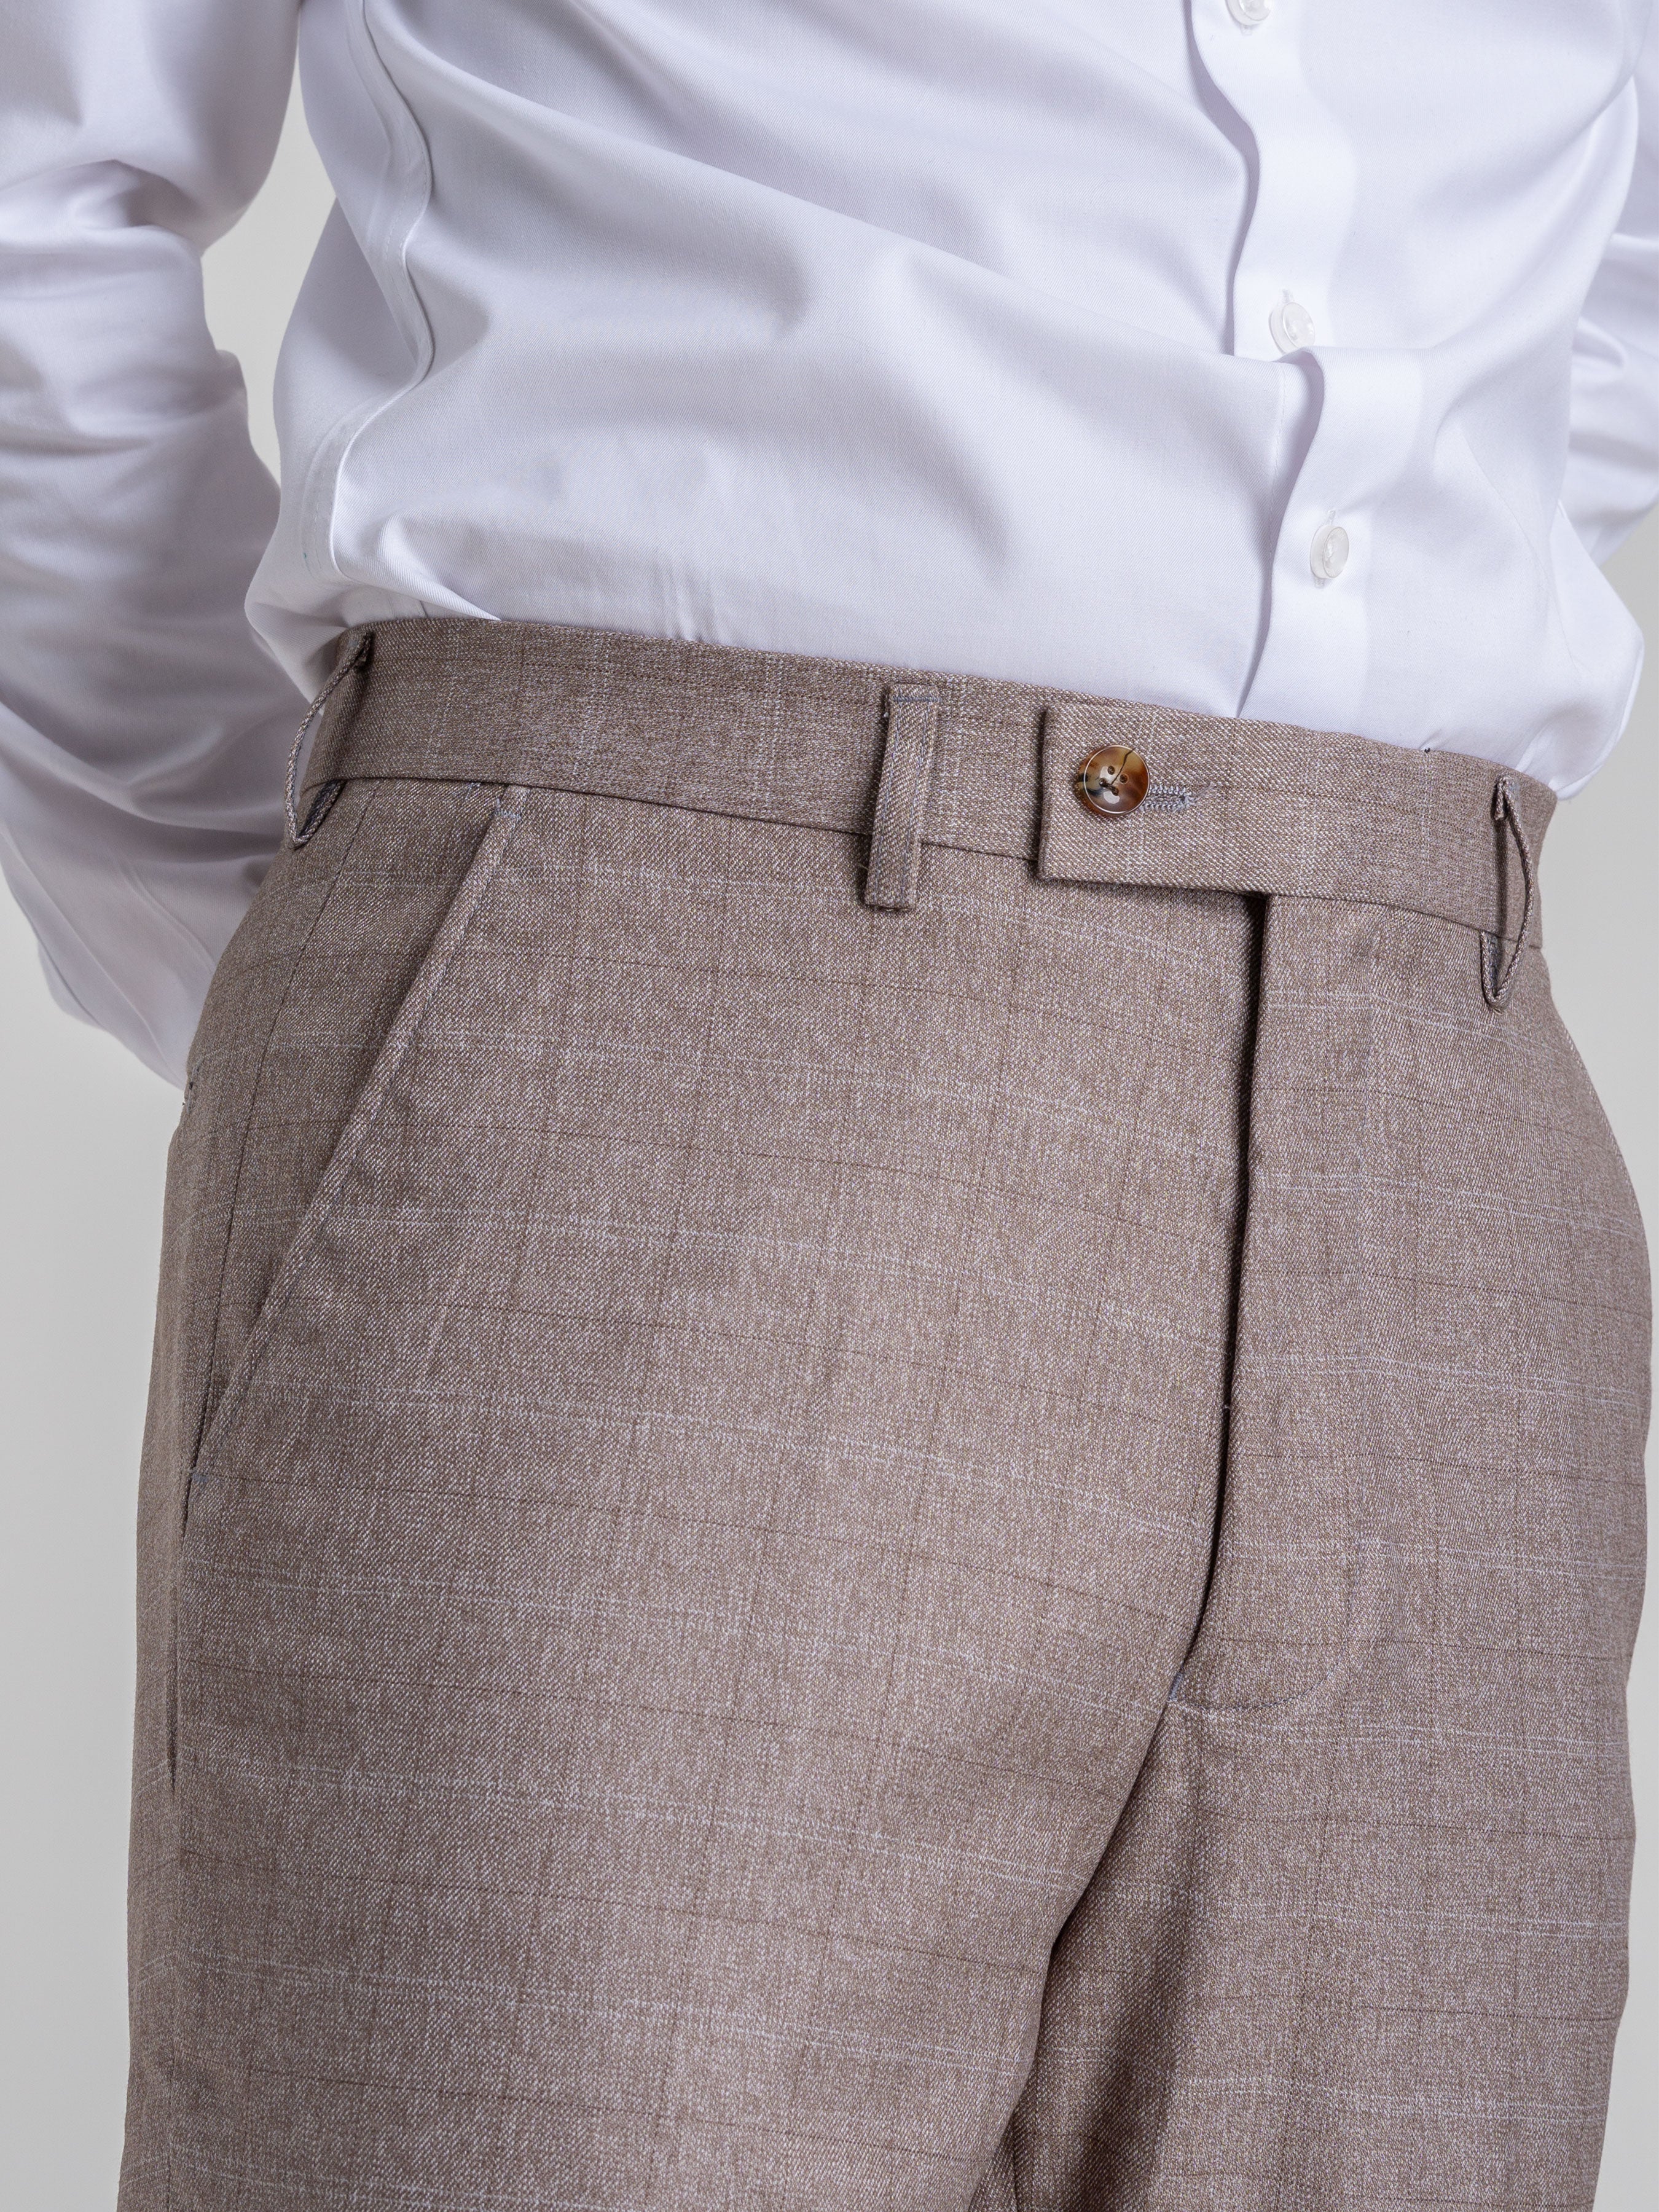 Trousers With Belt Loop - Light Brown Windowpane Checkered (Stretchable) - Zeve Shoes